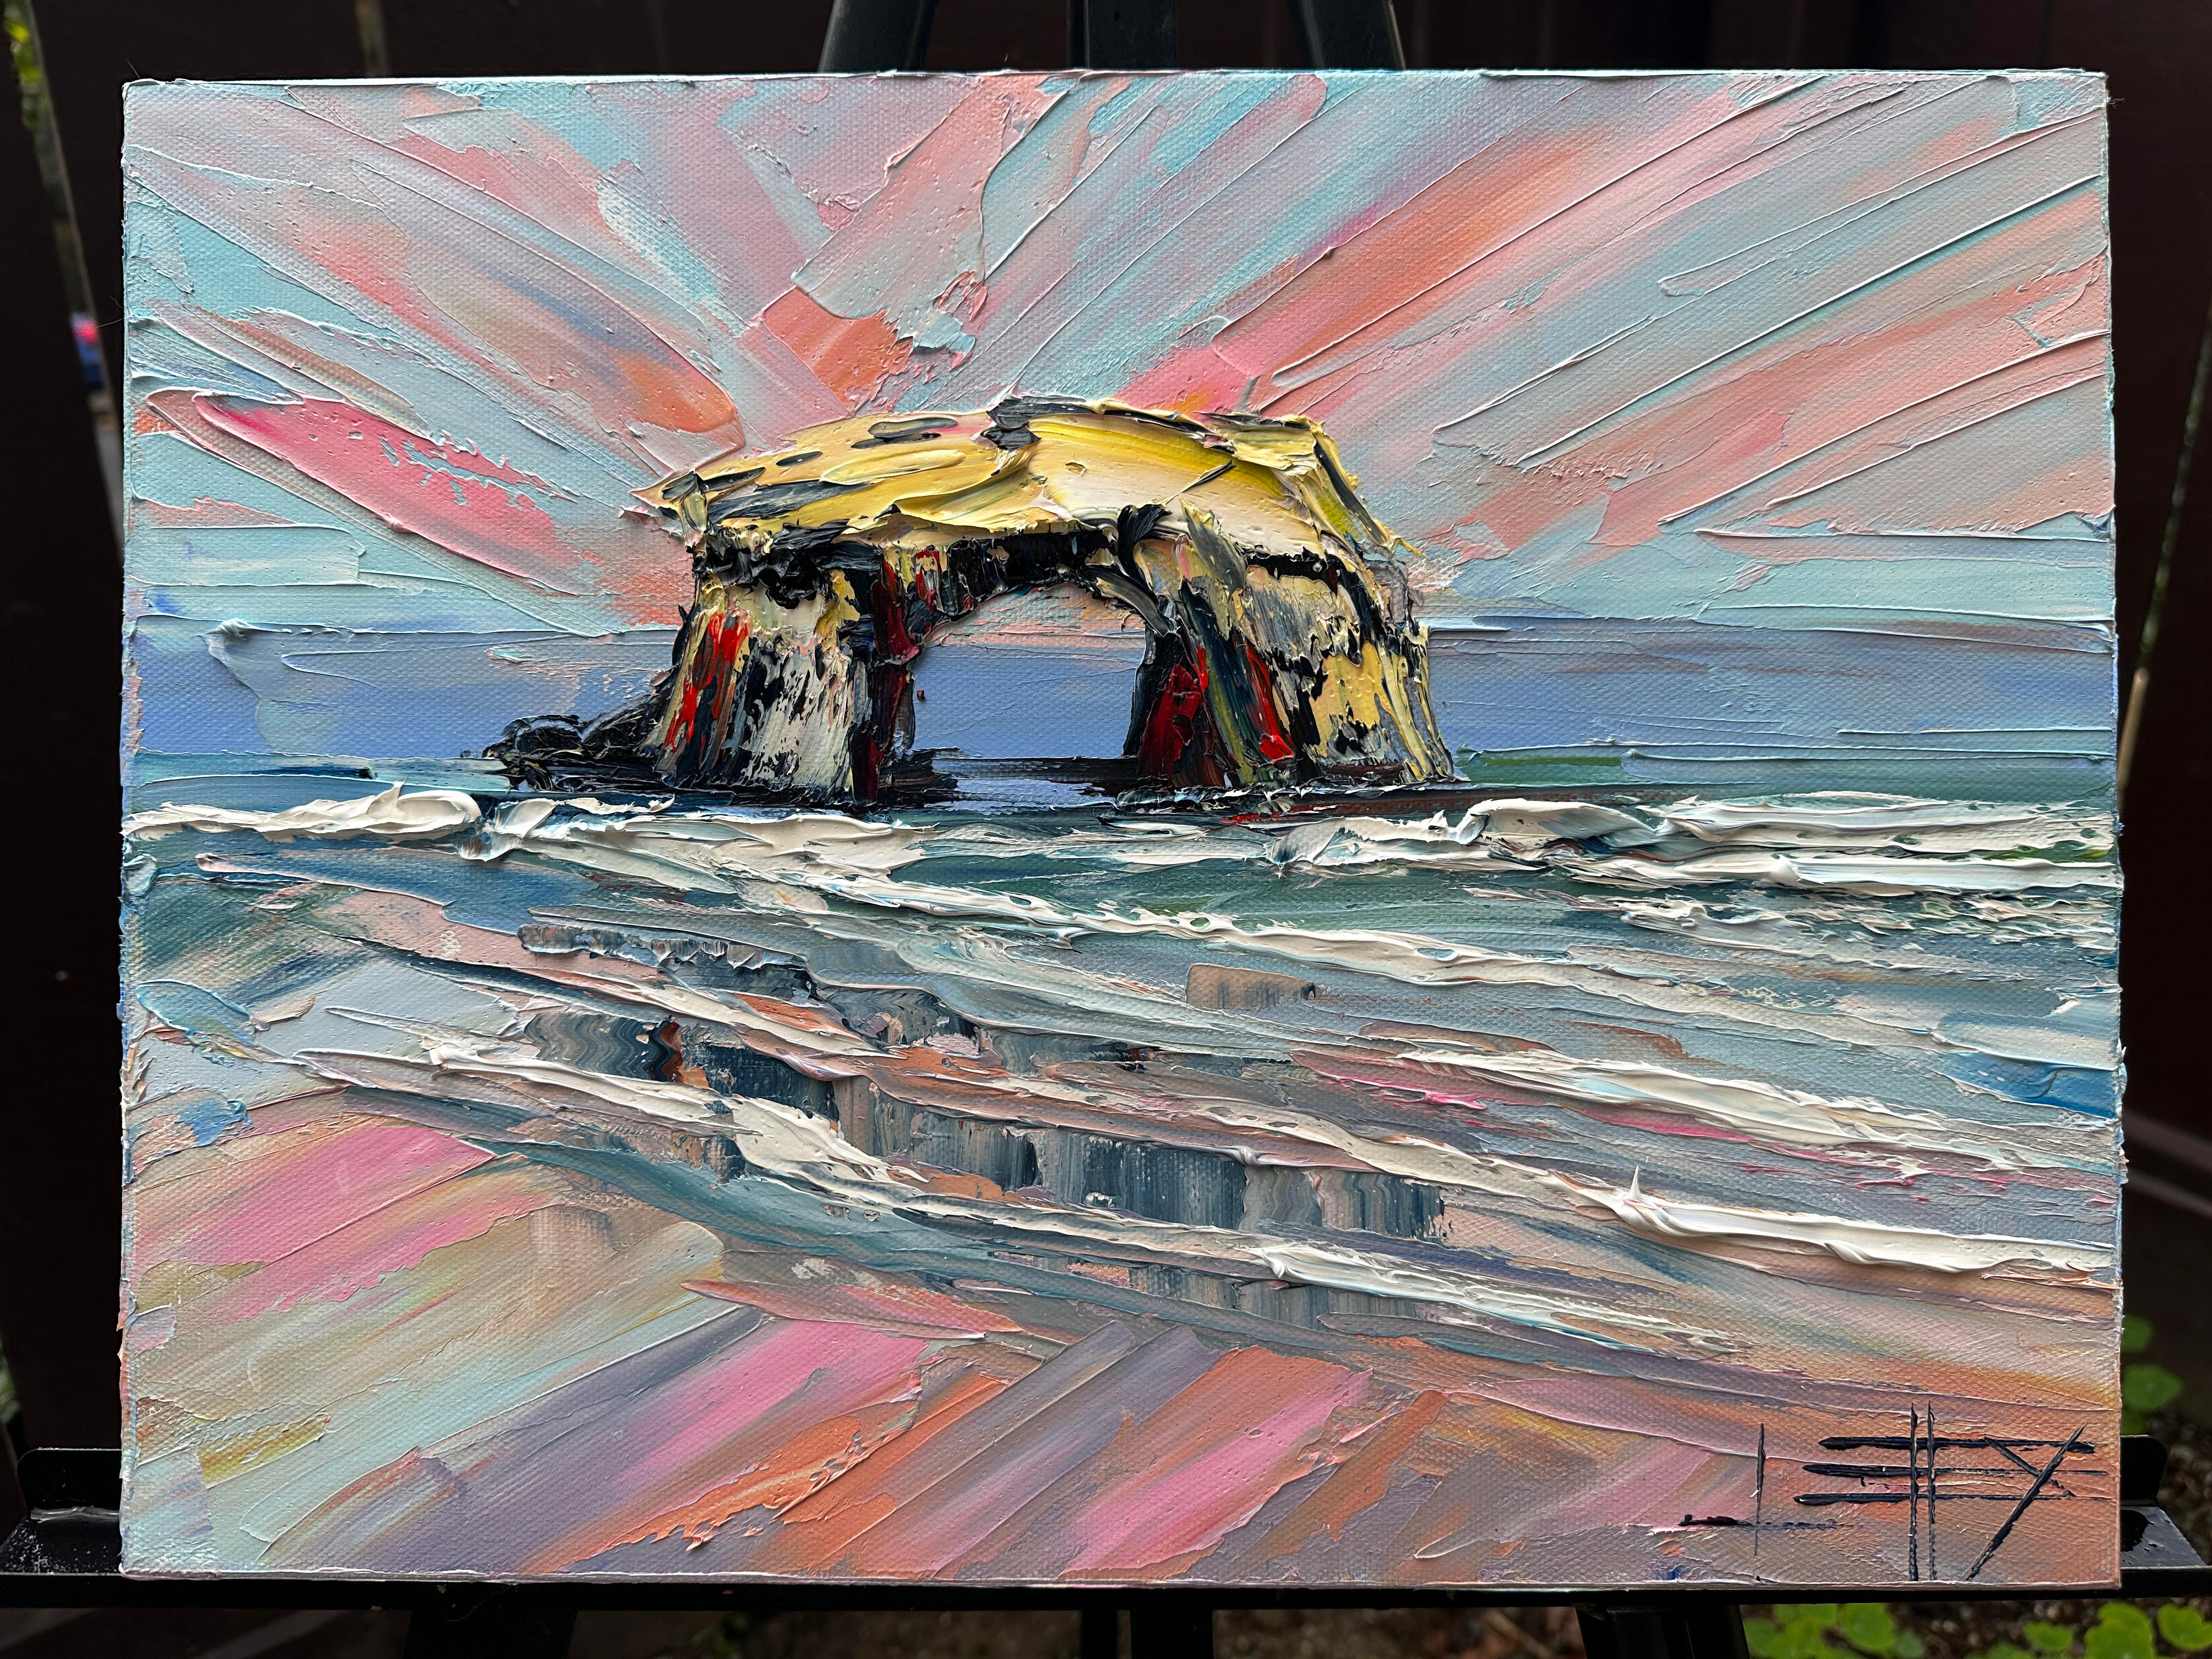 <p>Artist Comments<br>This painting vividly captures a lively sunset at Natural Bridges State Park in Santa Cruz, California. The sky's reflection ripples with the rolling waves, blending pinks and blues. The bold strokes and striking colors applied